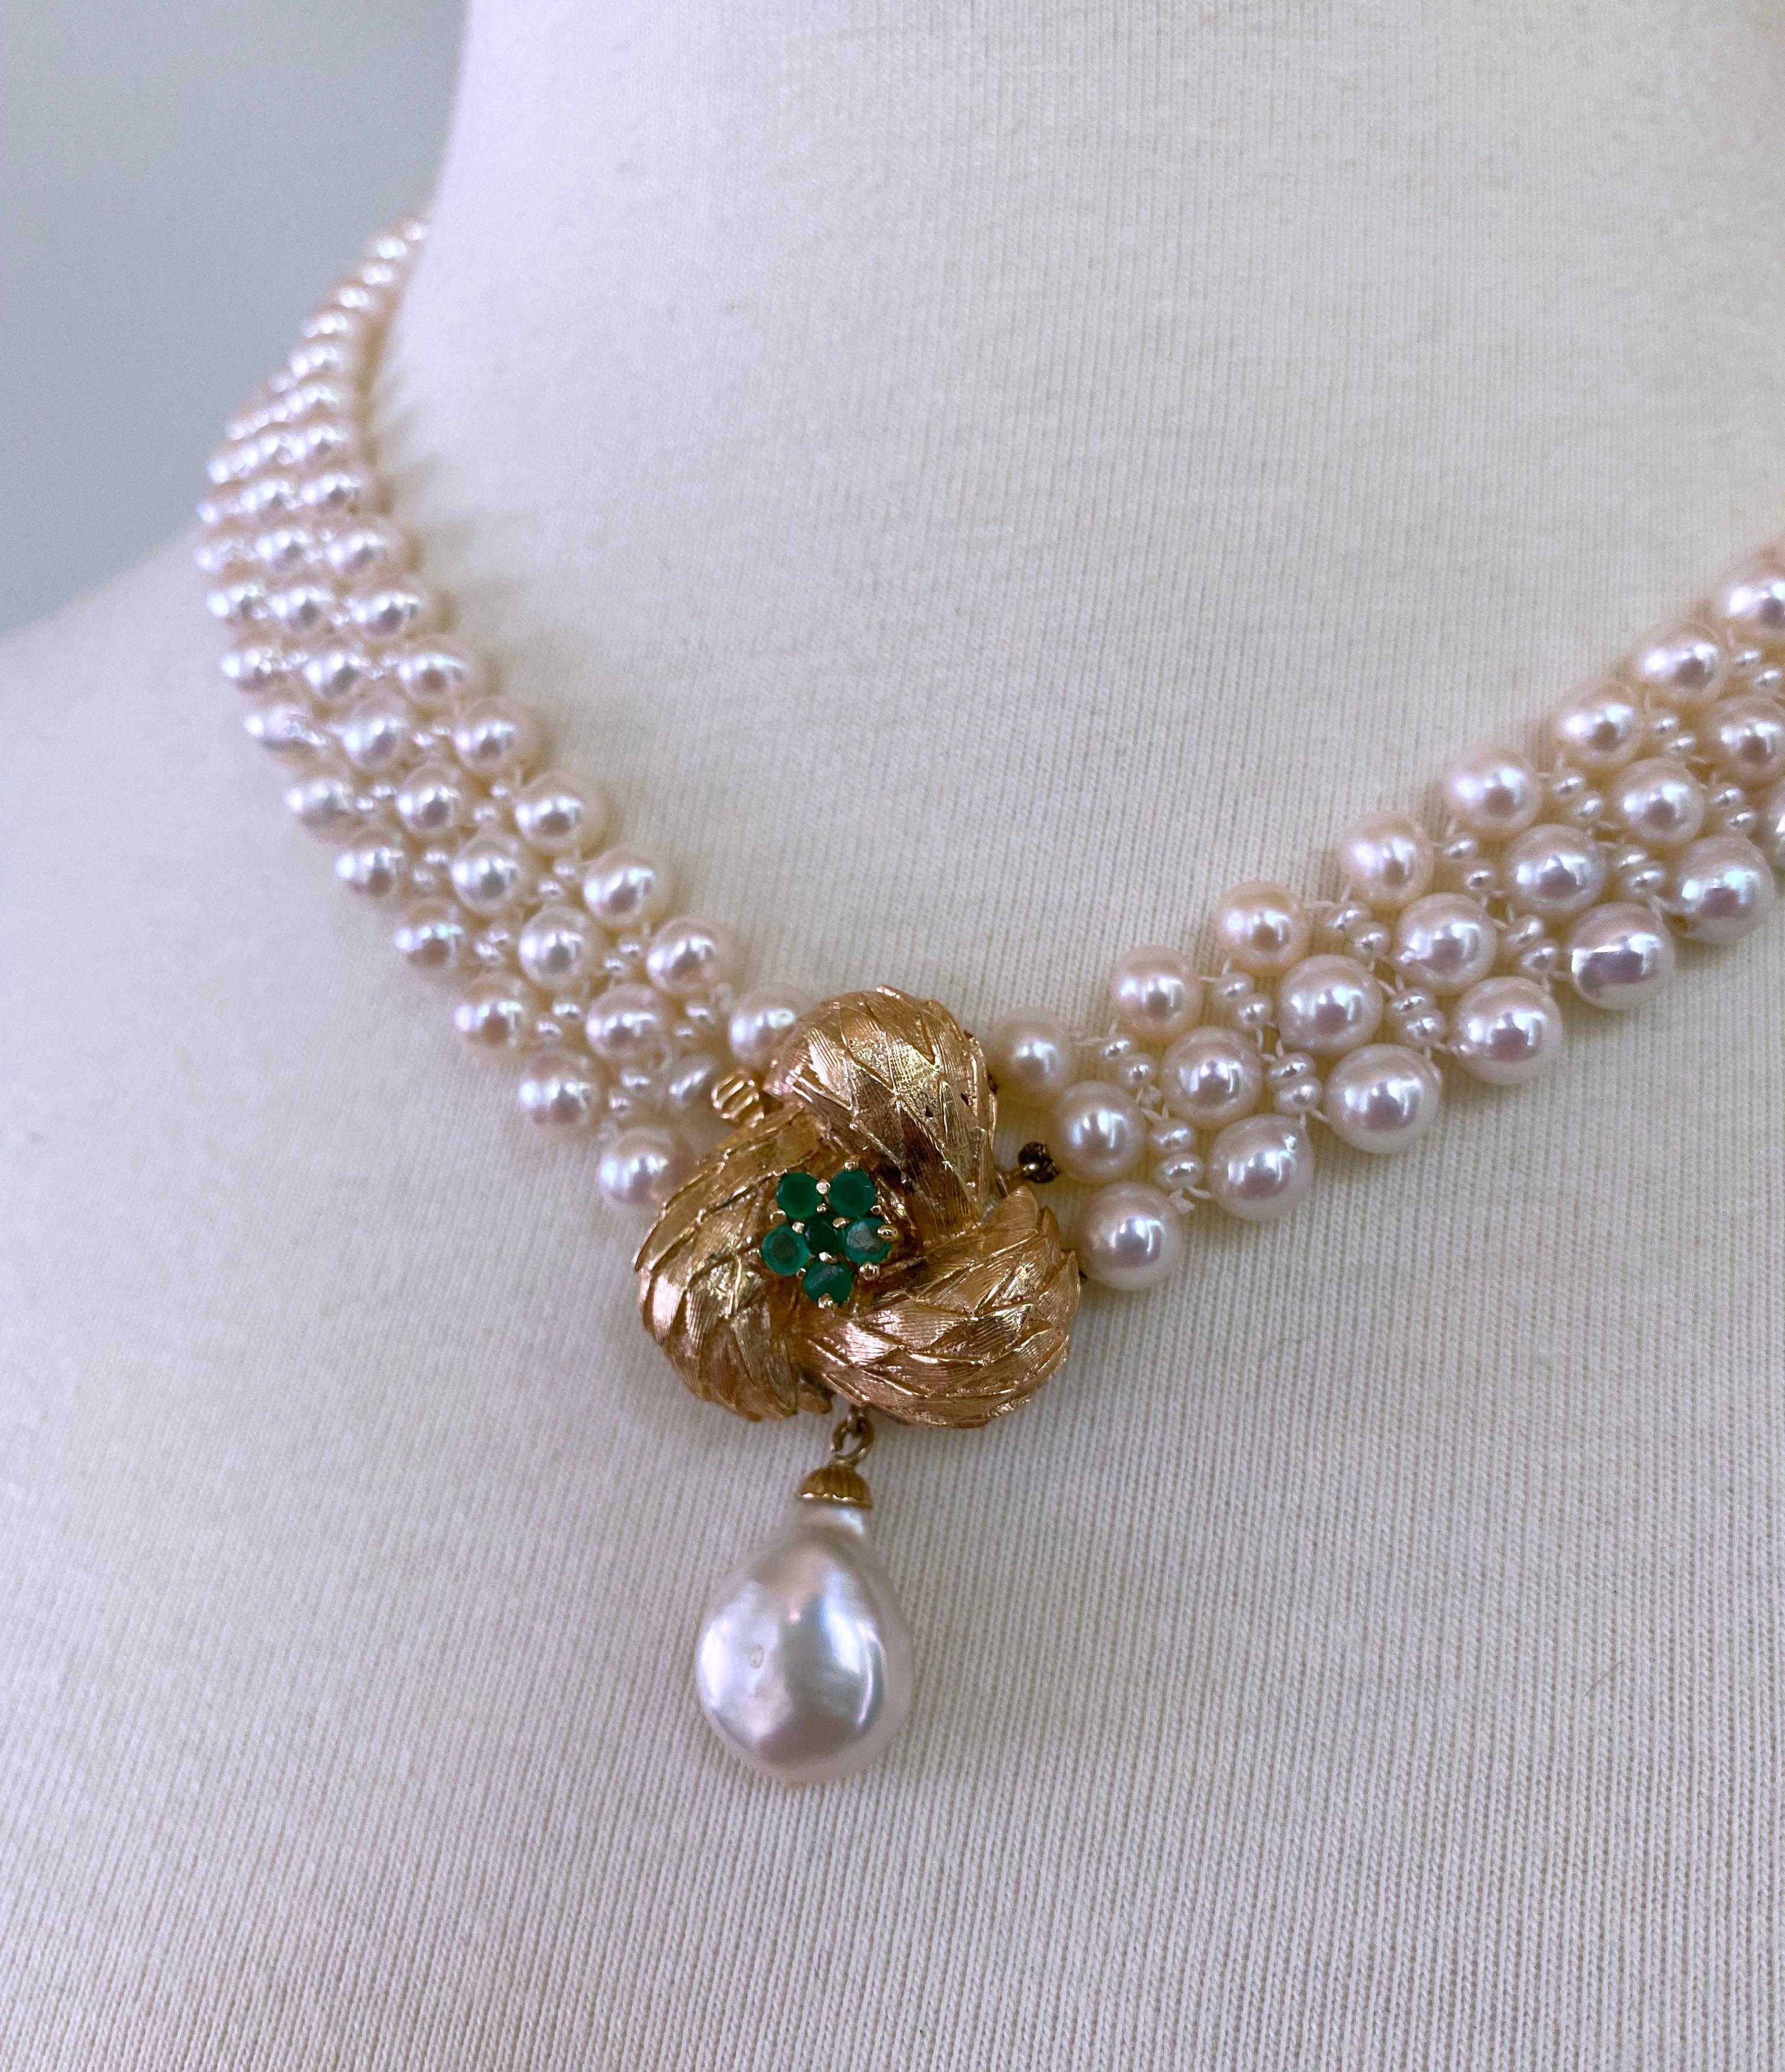 This handwoven white pearl necklace with emerald and 14 k yellow gold floral centerpiece is beautiful and practical as the centerpiece acts as a front-facing clasp. The centerpiece is made of 14 k yellow gold with a central green flower emerald and